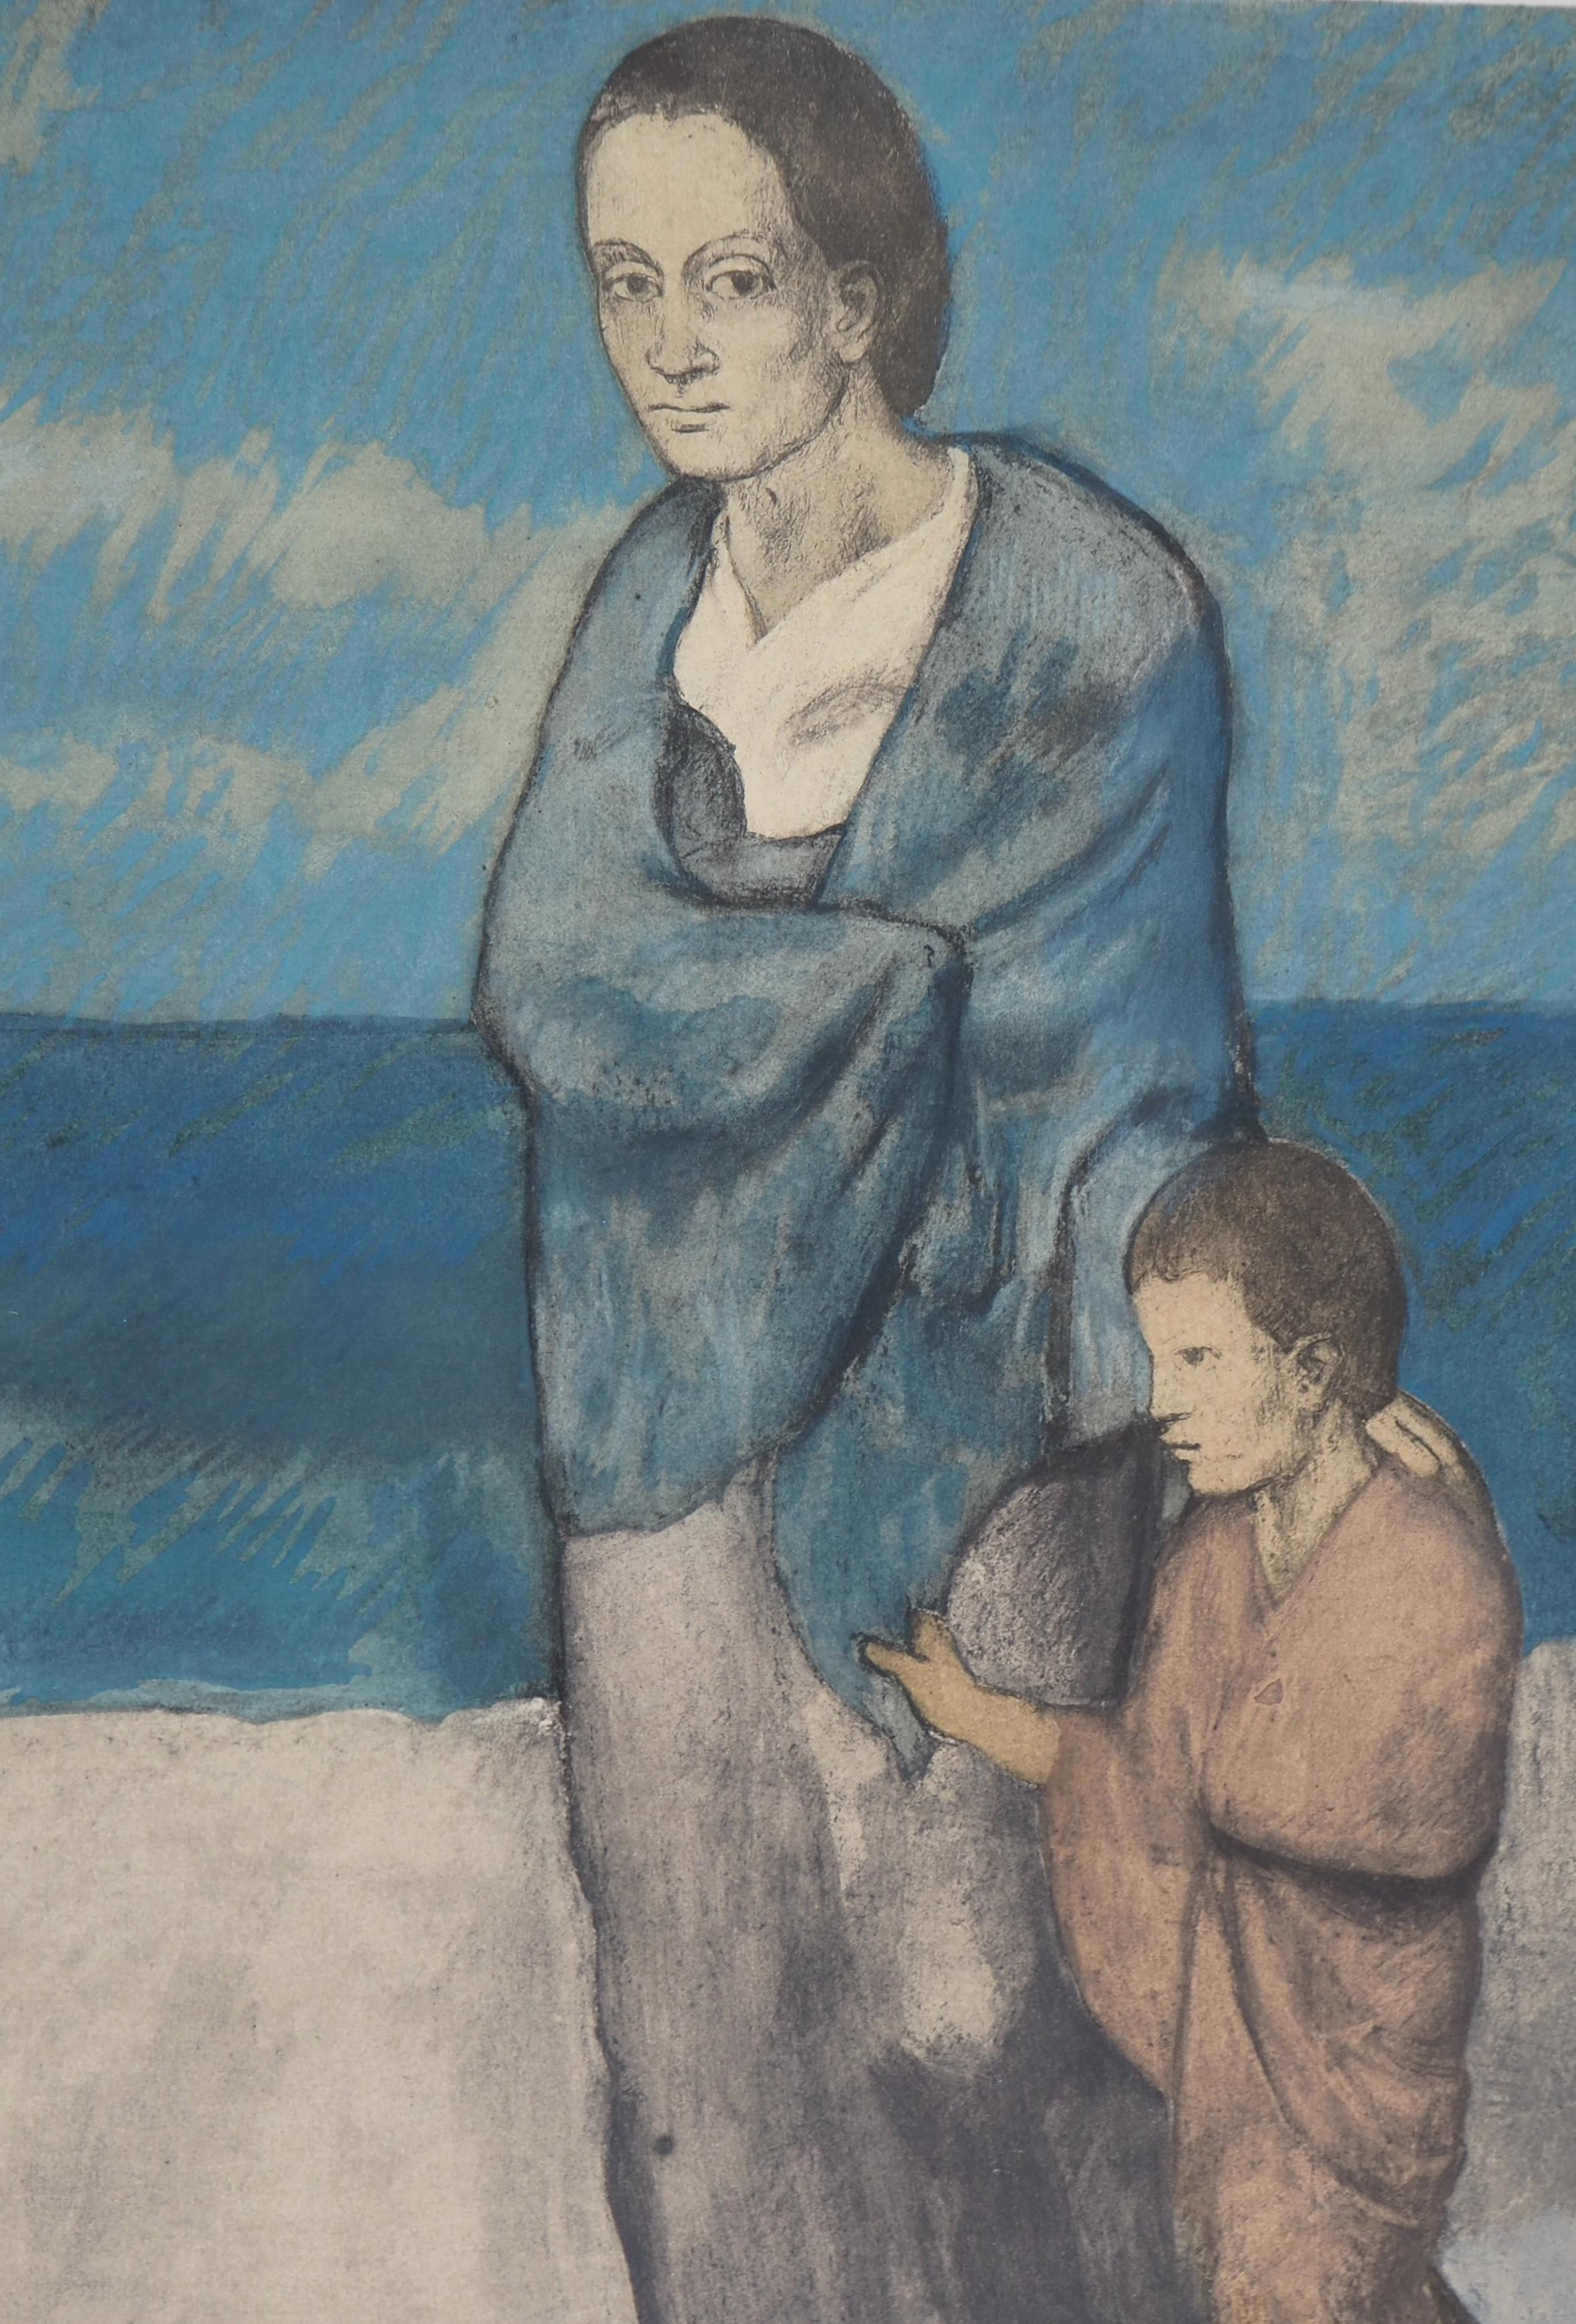 Pablo Picasso (1881-1973) (after)
Mother and Child

Lithograph enhanced with stencil (Jacomet process)
Printed signature in the plate
On paper 55.5 x 38 cm
Authenticated by the publisher's stamp, edited c. 1950

Excellent condition